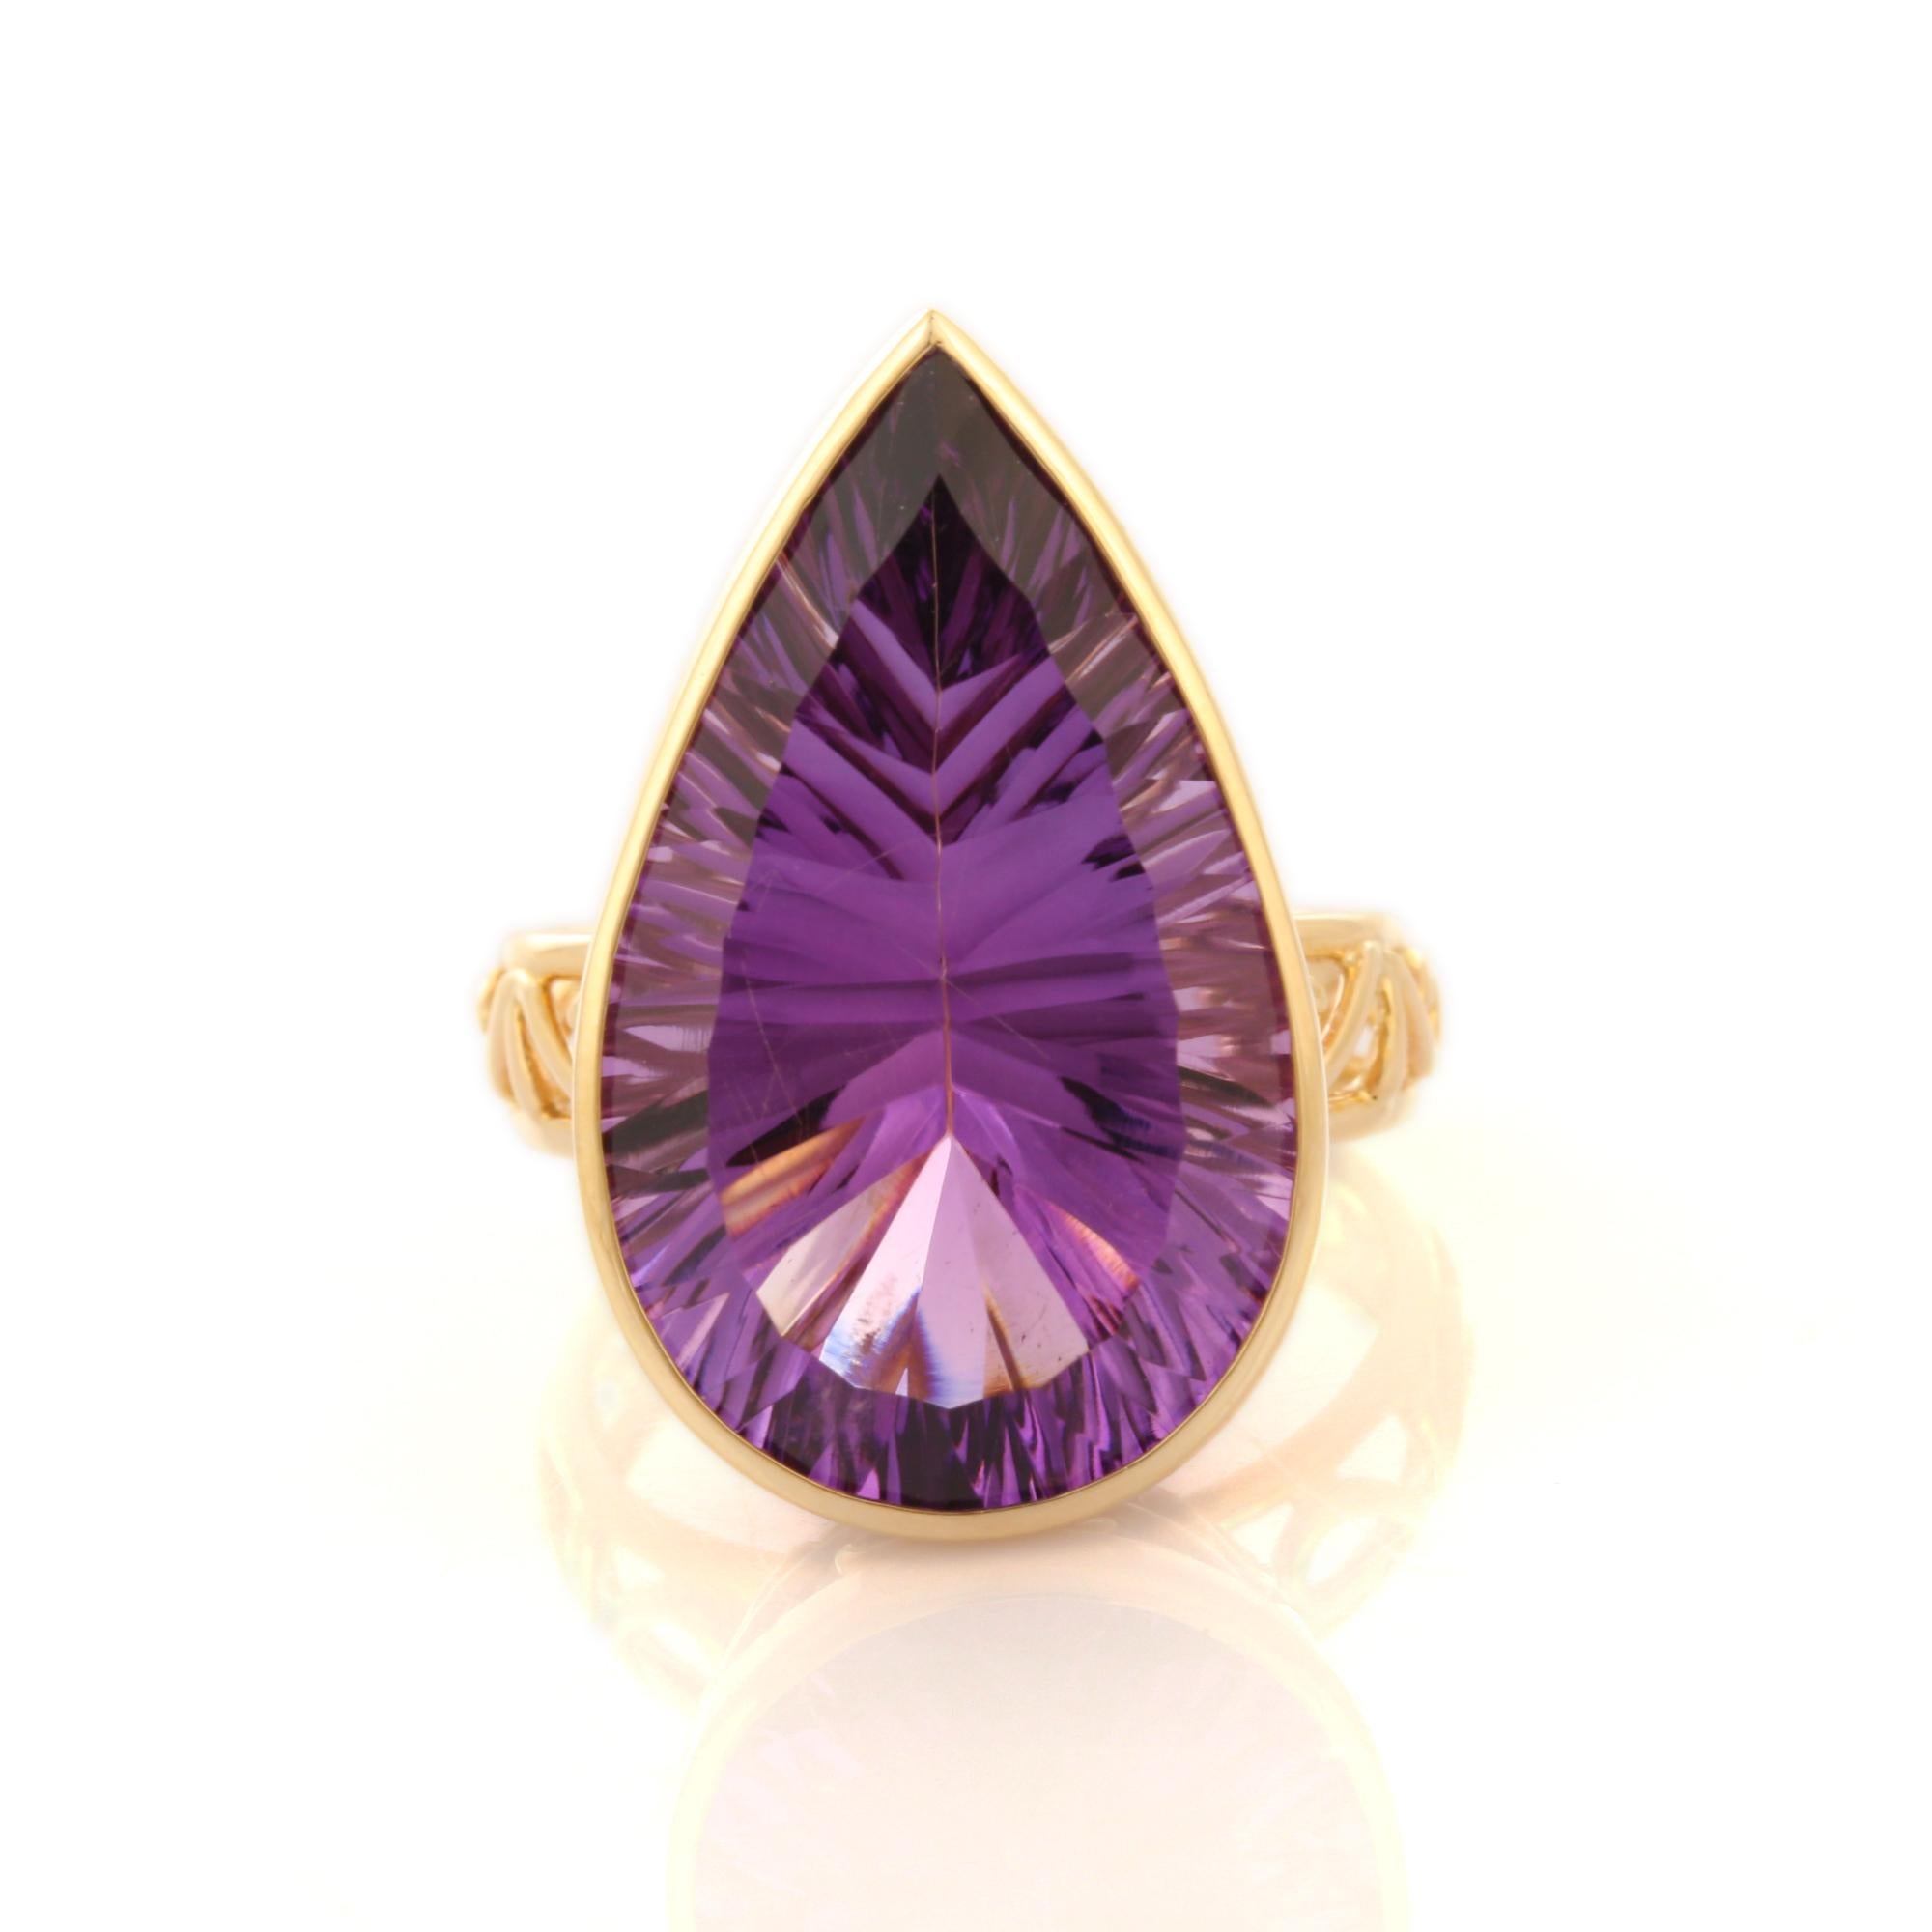 18.2 Carat Pear Cut Amethyst Cocktail Ring in 14K Yellow Gold